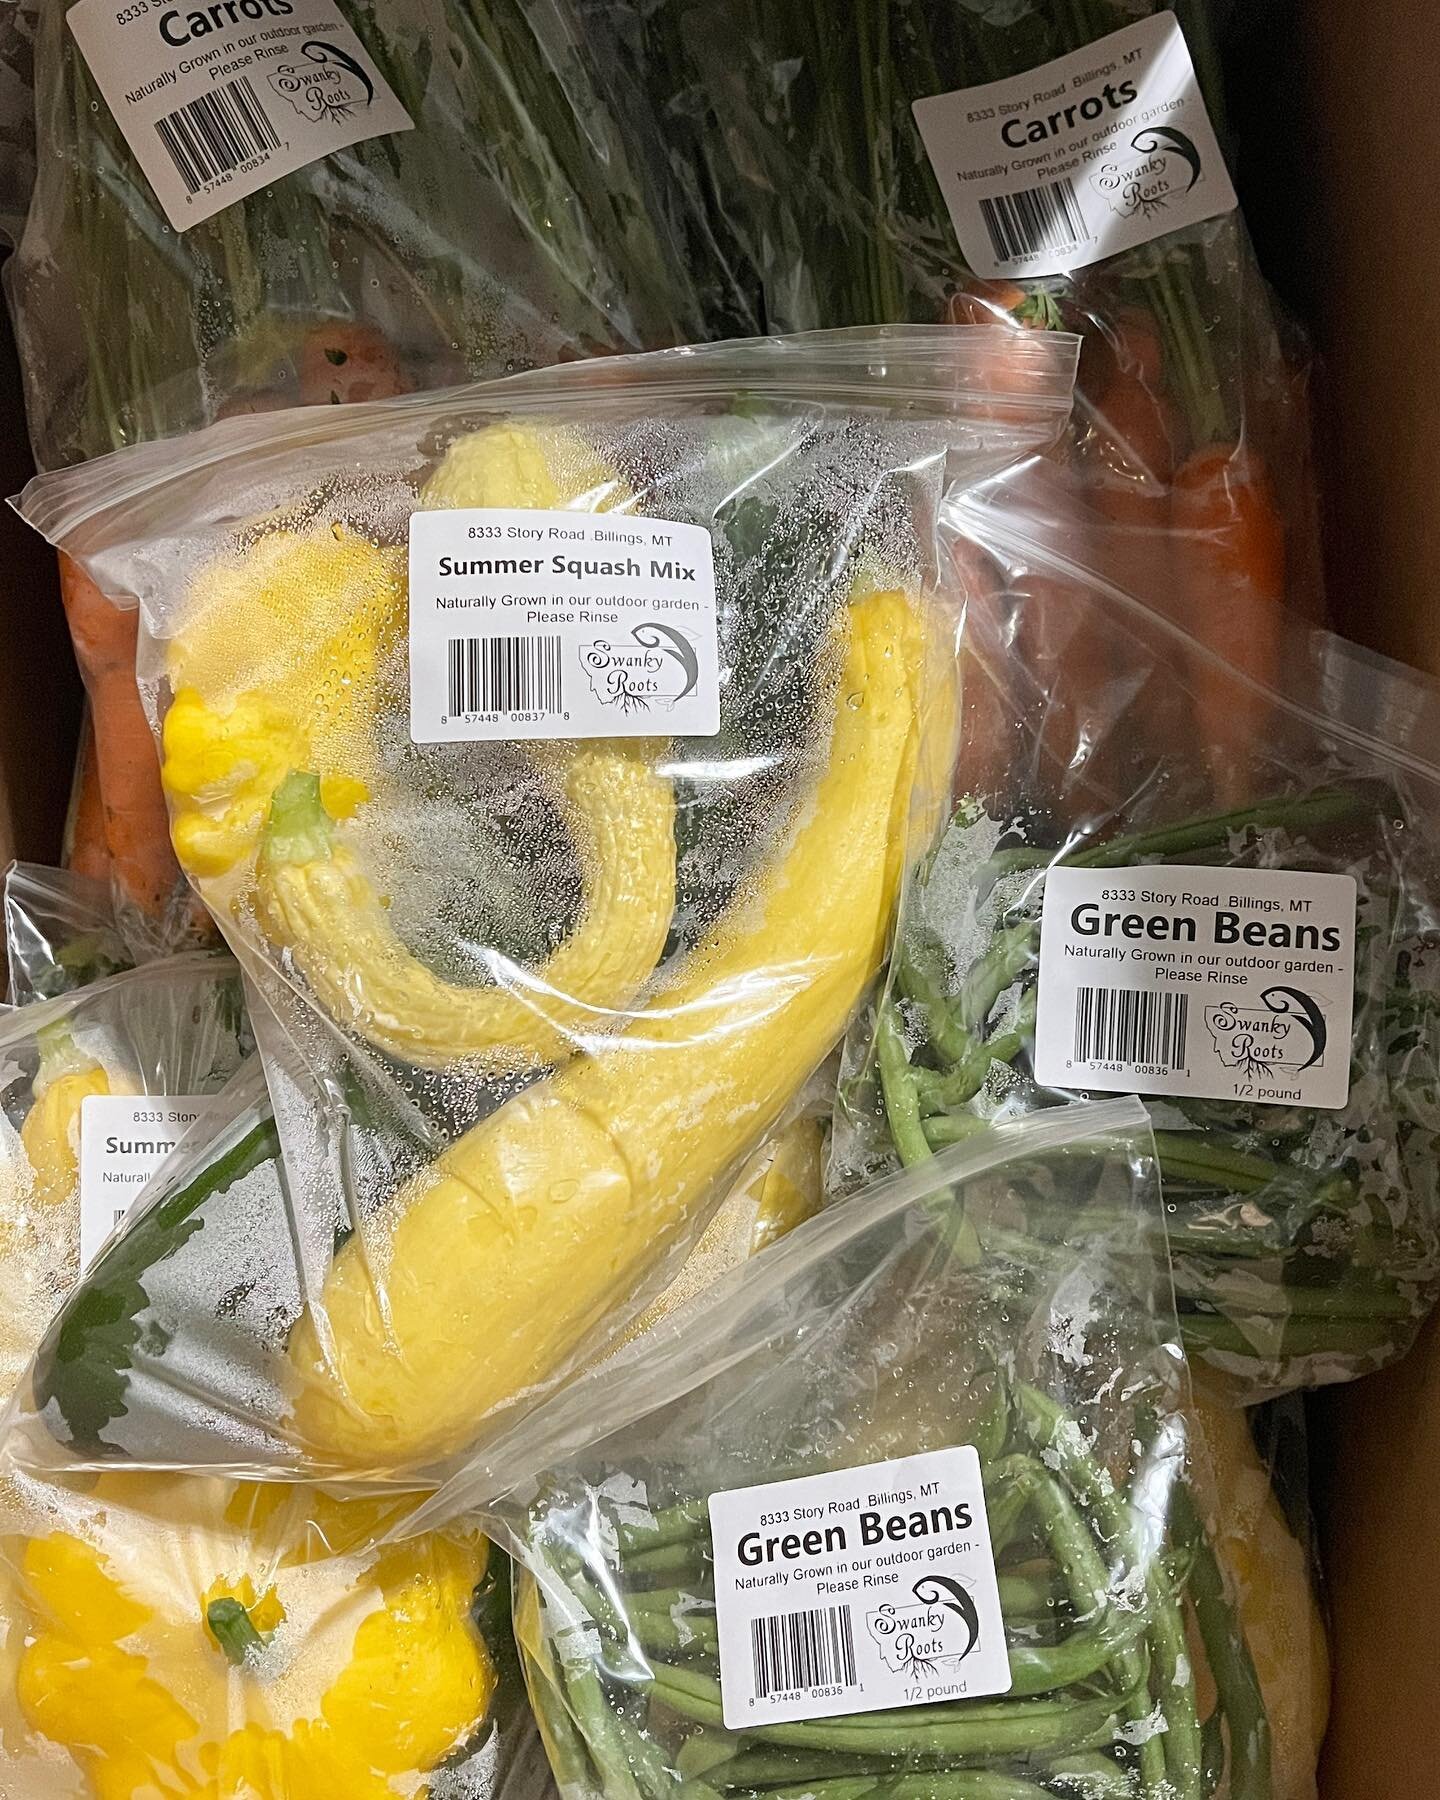 Look at all the veggies you can find from us at Town &amp; Country Foods in Billings! And of course , our lettuce 🥬 #billingsmontana #billings #supportlocal #smallbusinesssupport